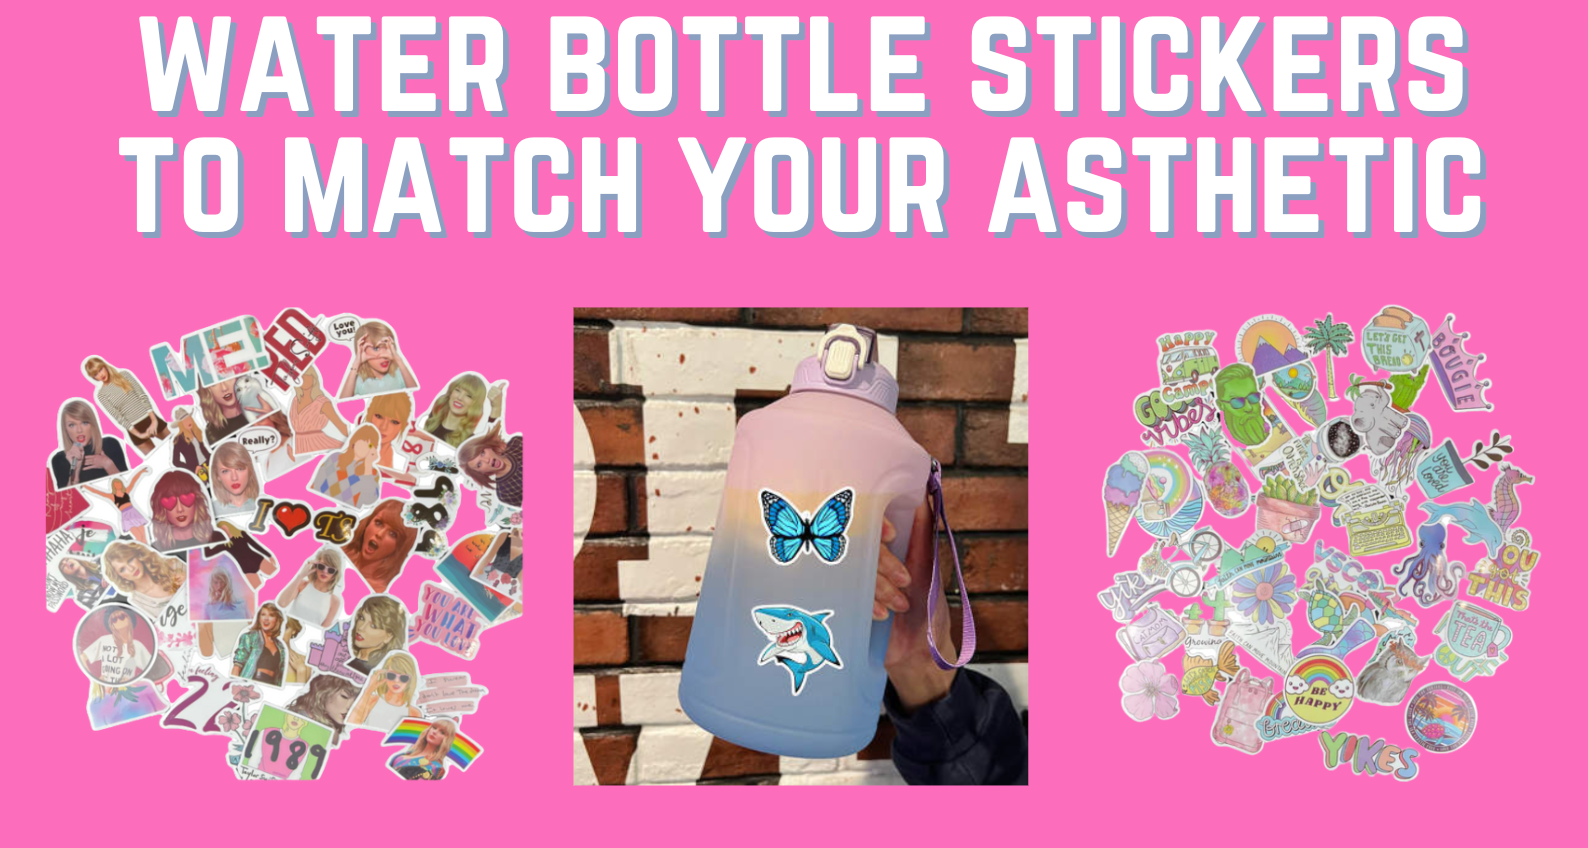 Water Bottle Stickers to Match Your Aesthetic - CharCharms Blog 